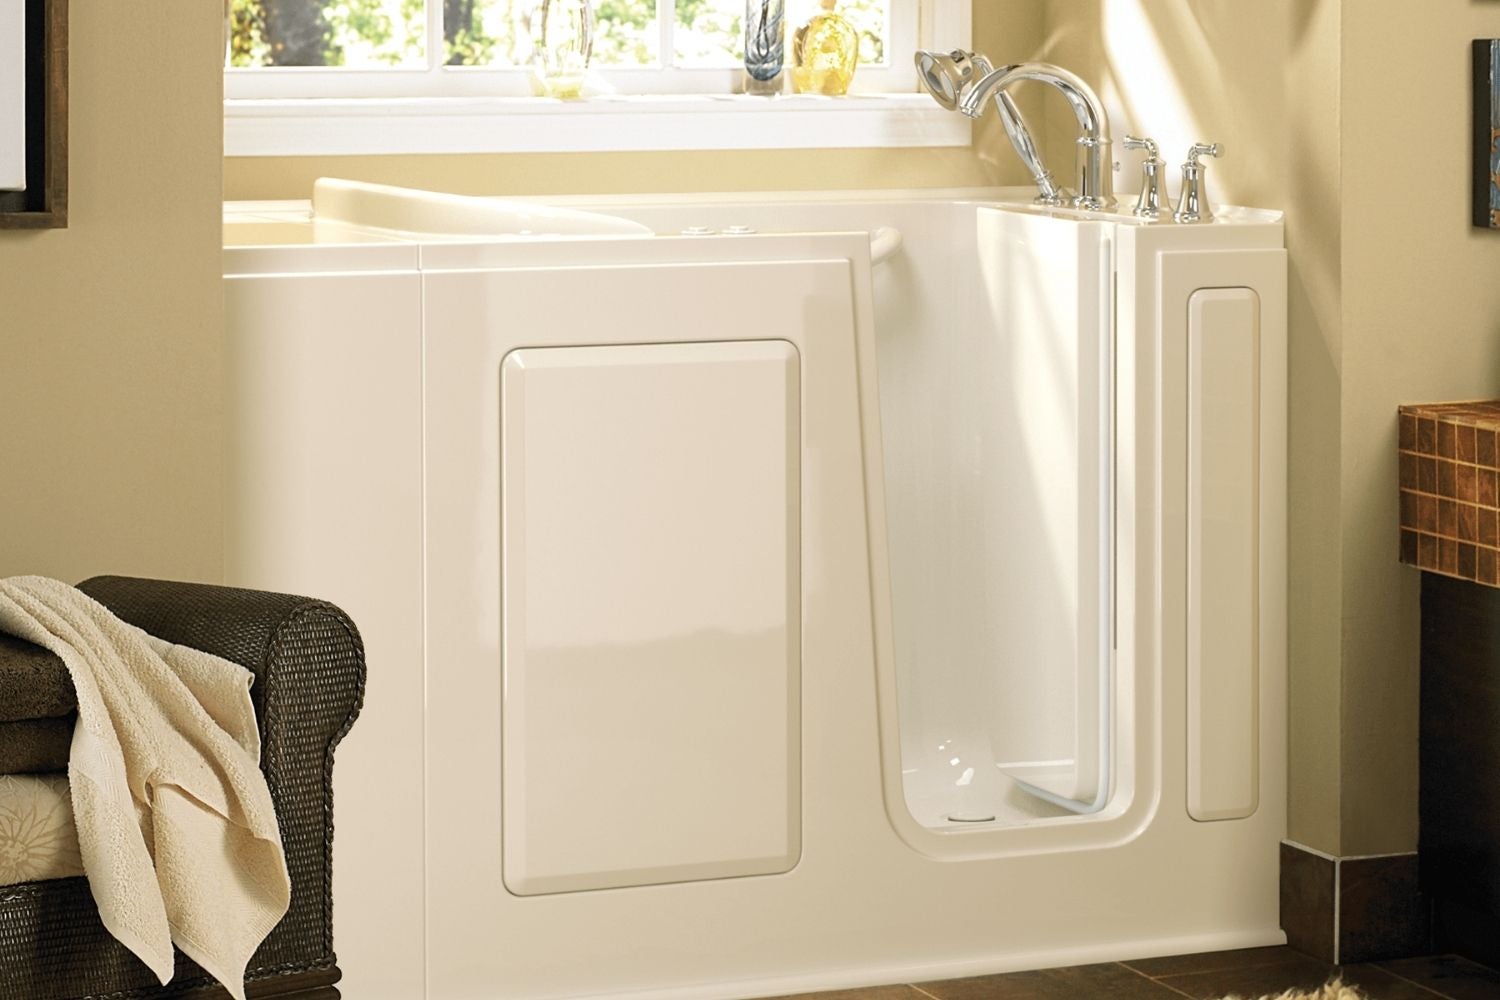 Walk-In Tub What Are The Pros And Cons